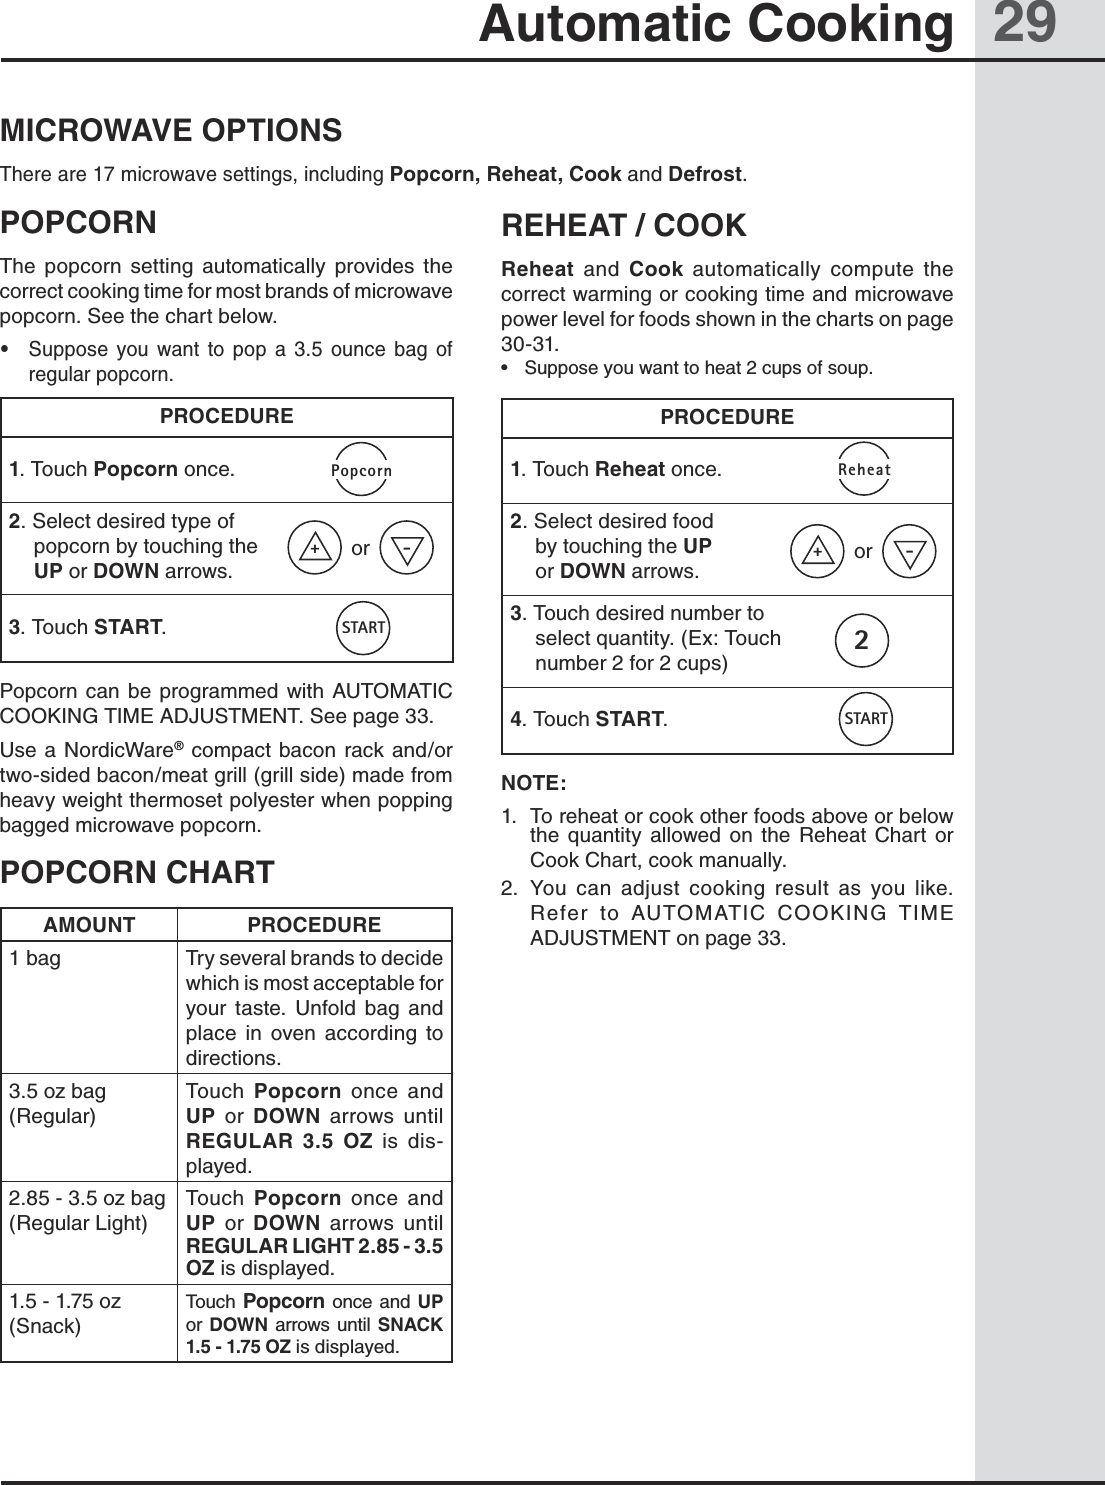 29Automatic CookingMICROWAVE OPTIONSThere are 17 microwave settings, including Popcorn, Reheat, Cook and Defrost.POPCORNThe  popcorn  setting  automatically  provides  the correct cooking time for most brands of microwave popcorn. See the chart below.•  Suppose  you  want  to  pop  a  3.5  ounce  bag  of regular popcorn.PROCEDURE1. Touch Popcorn once.2. Select desired type of popcorn by touching the UP or DOWN arrows.3. Touch START. Popcorn can  be  programmed  with  AUTOMATIC COOKING TIME ADJUSTMENT. See page 33.Use a NordicWare® compact bacon rack and/or two-sided bacon/meat grill (grill side) made from heavy weight thermoset polyester when popping bagged microwave popcorn.POPCORN CHARTAMOUNT PROCEDURE1 bag Try several brands to decide which is most acceptable for your  taste.  Unfold  bag  and place  in  oven  according  to directions.3.5 oz bag (Regular)Touch  Popcorn  once  and UP  or  DOWN  arrows  until REGULAR  3.5  OZ  is  dis-played.2.85 - 3.5 oz bag (Regular Light)Touch  Popcorn  once  and UP  or  DOWN  arrows  until REGULAR LIGHT 2.85 - 3.5 OZ is displayed.1.5 - 1.75 oz (Snack)Touch Popcorn once and  UP      or  DOWN  arrows until SNACK 1.5 - 1.75 OZ is displayed.REHEAT / COOKReheat  and  Cook  automatically  compute  the correct warming or cooking time and microwave power level for foods shown in the charts on page 30-31.•  Suppose you want to heat 2 cups of soup.PROCEDURE1. Touch Reheat once.2. Select desired food   by touching the UP   or DOWN arrows.3. Touch desired number to select quantity. (Ex: Touch number 2 for 2 cups)4. Touch START. NOTE:1.  To reheat or cook other foods above or below the  quantity  allowed  on  the  Reheat  Chart  or Cook Chart, cook manually.2.  You  can  adjust  cooking  result  as  you  like.        Refer  to  AUTOMATIC  COOKING  TIME ADJUSTMENT on page 33.+-orSTARTPopcorn+-orSTARTReheat2